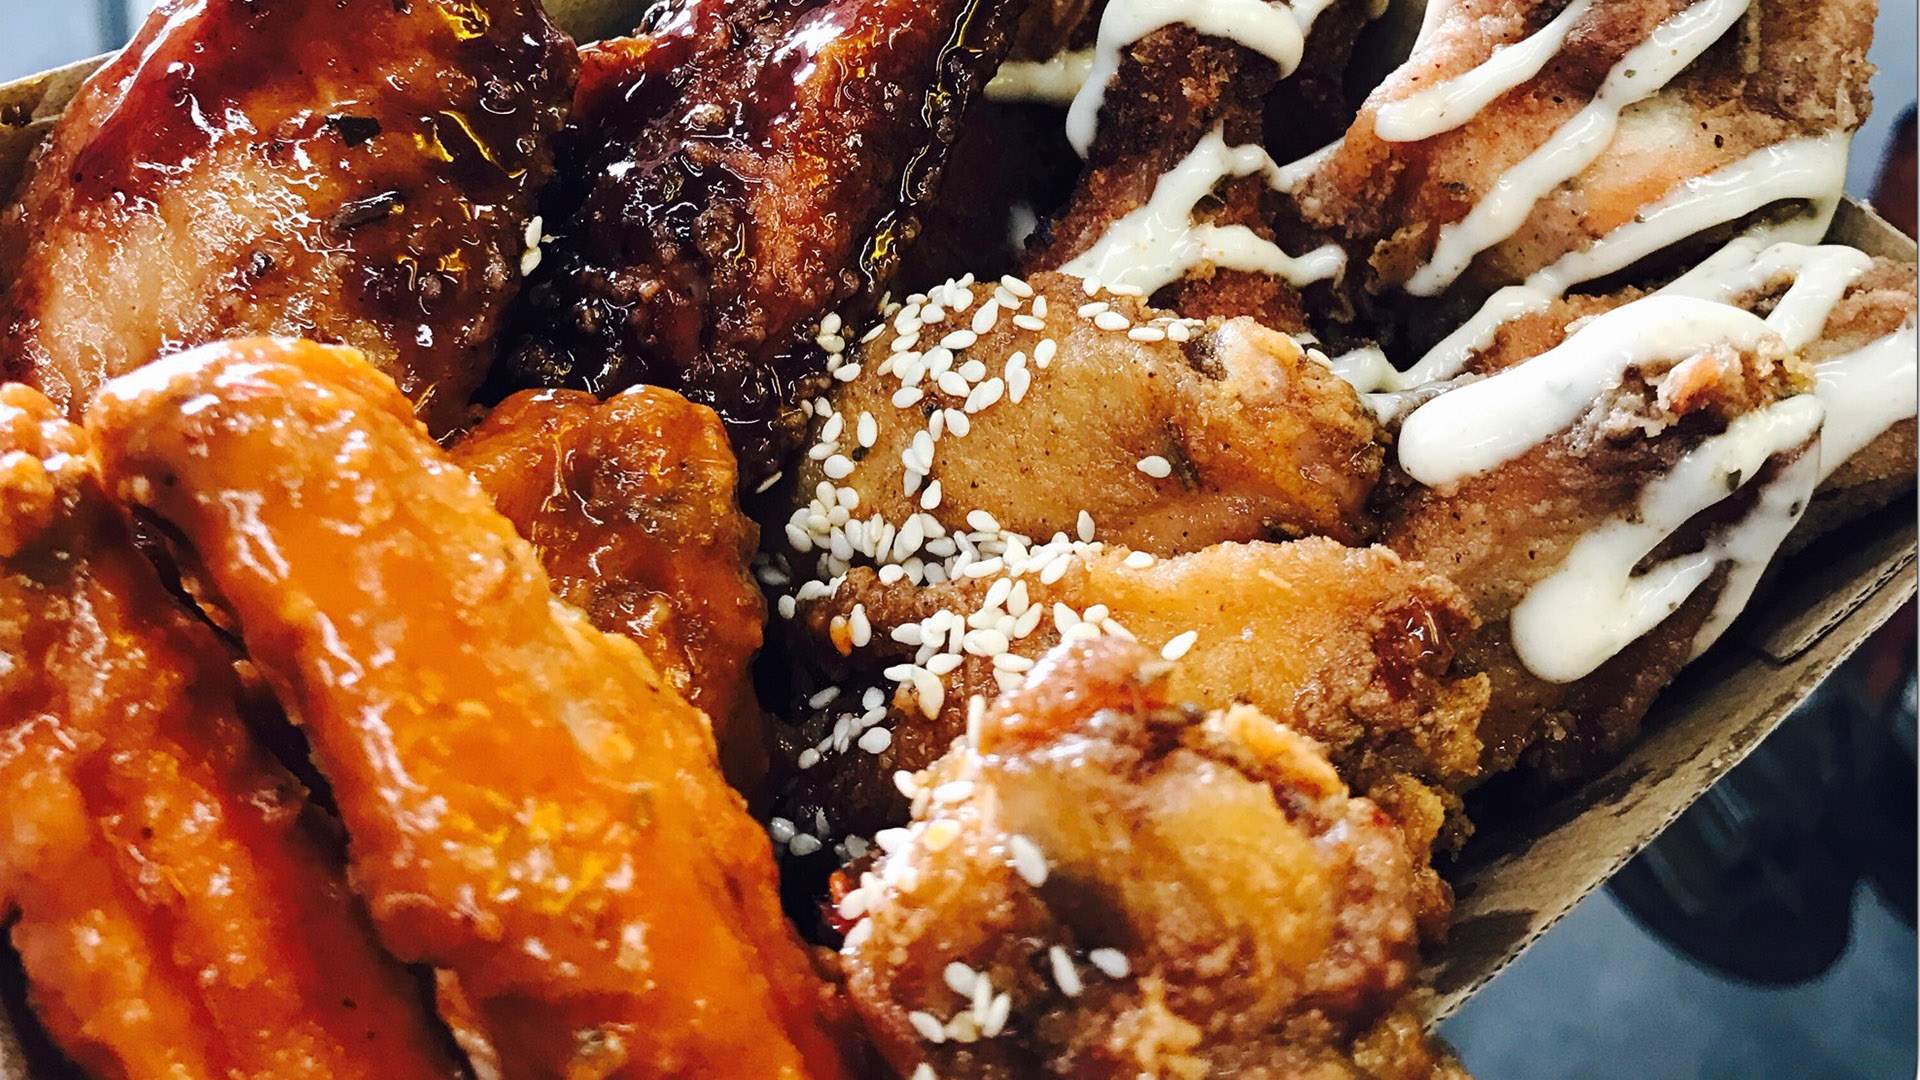 Brisbane Food Truck King of the Wings Is Bringing Its Spicy Poultry Pieces to Sydney